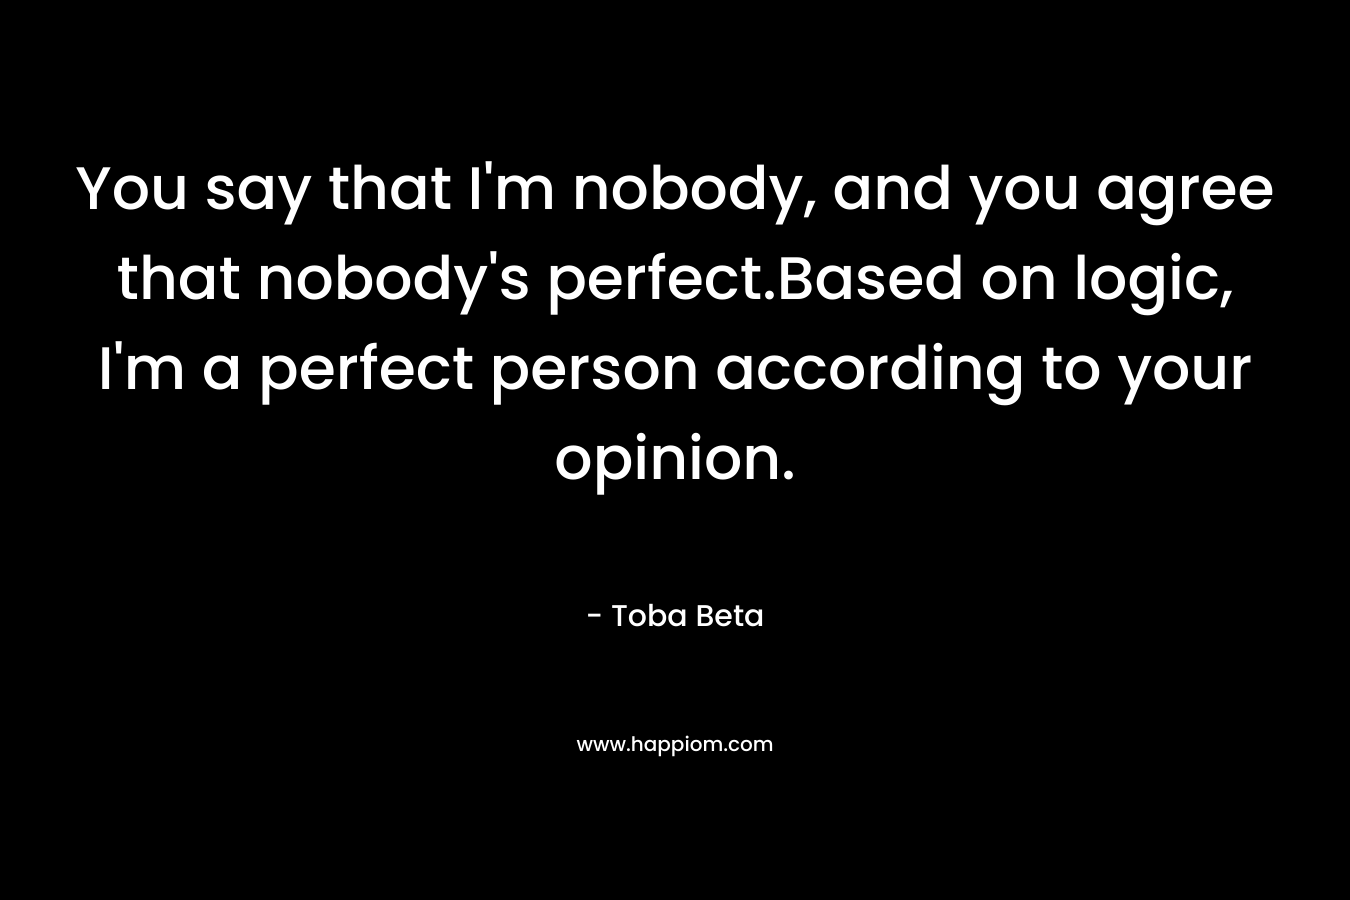 You say that I’m nobody, and you agree that nobody’s perfect.Based on logic, I’m a perfect person according to your opinion. – Toba Beta